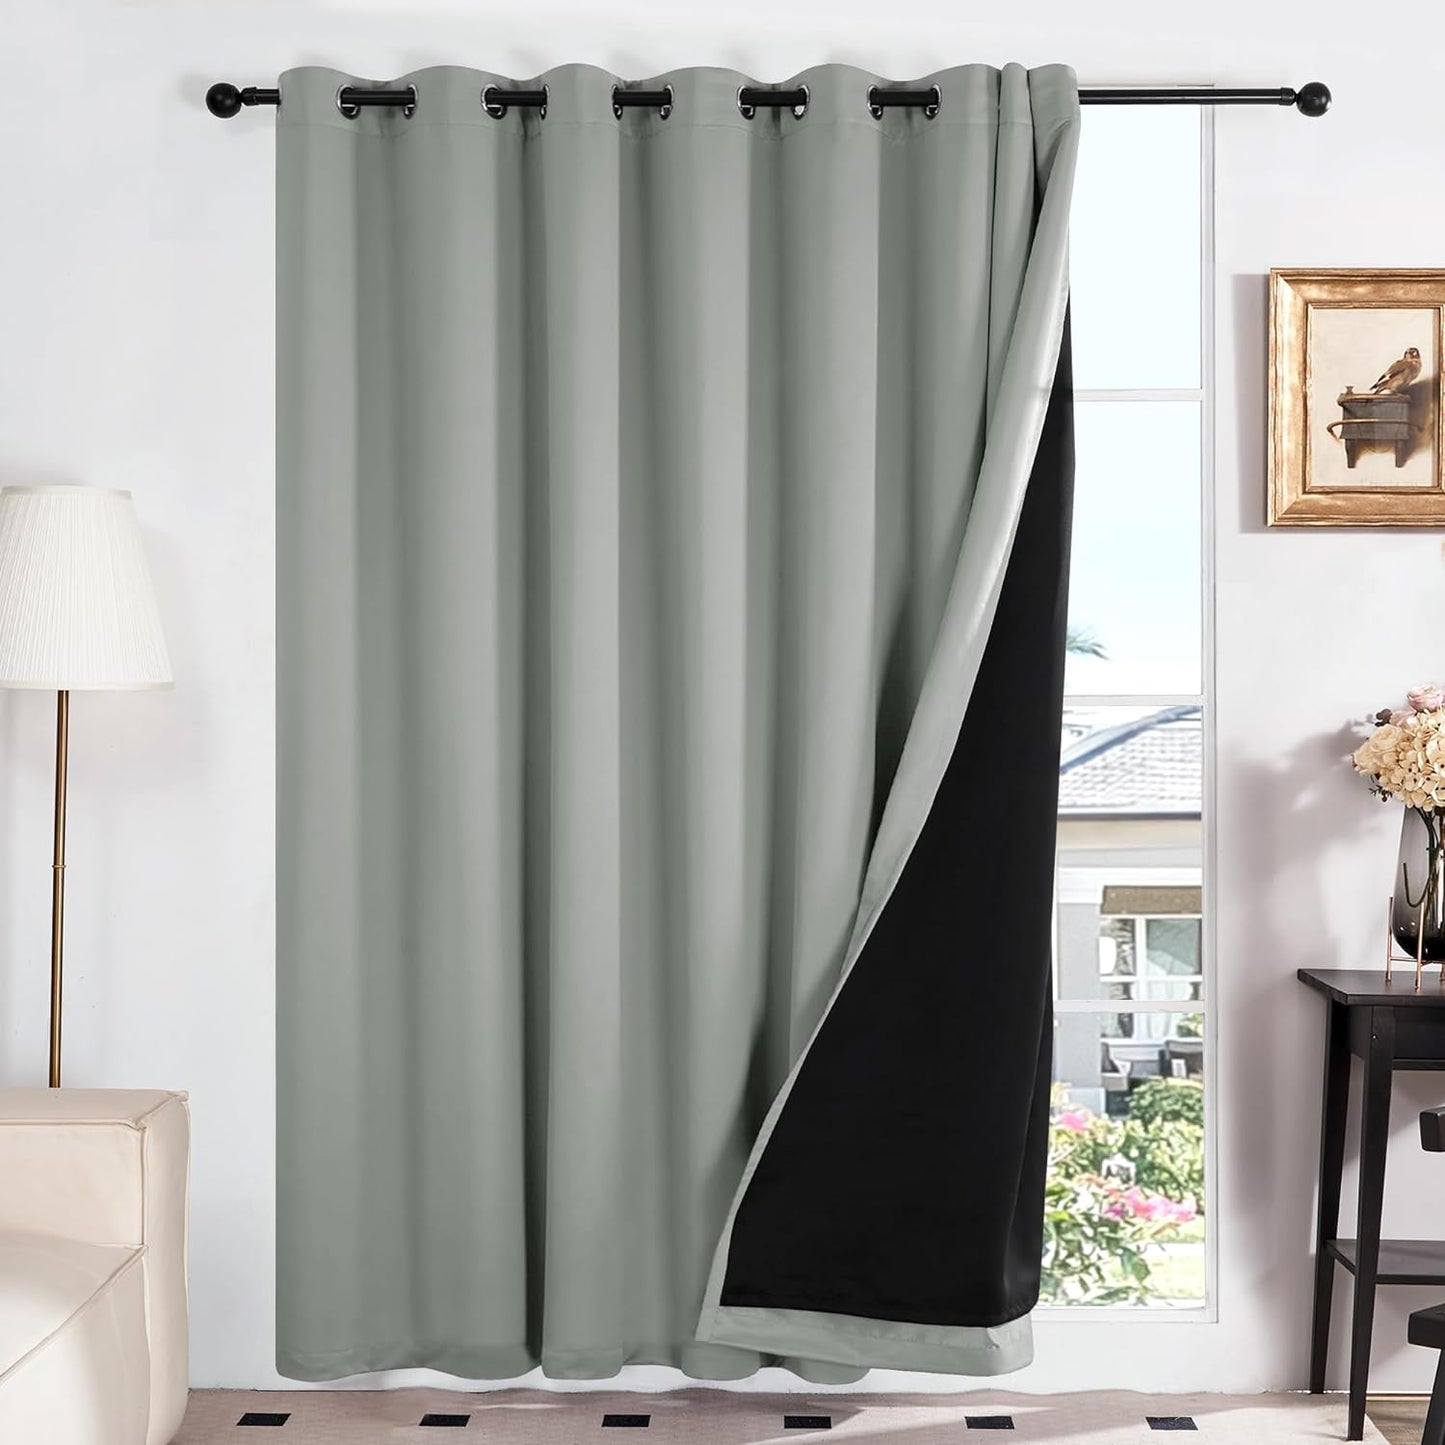 Deconovo 100% White Blackout Curtains, Double Layer Sliding Door Curtain for Living Room, Extra Wide Room Divder Curtains for Patio Door (100W X 84L Inches, Pure White, 1 Panel)  DECONOVO Light Grey 100W X 84L Inch 